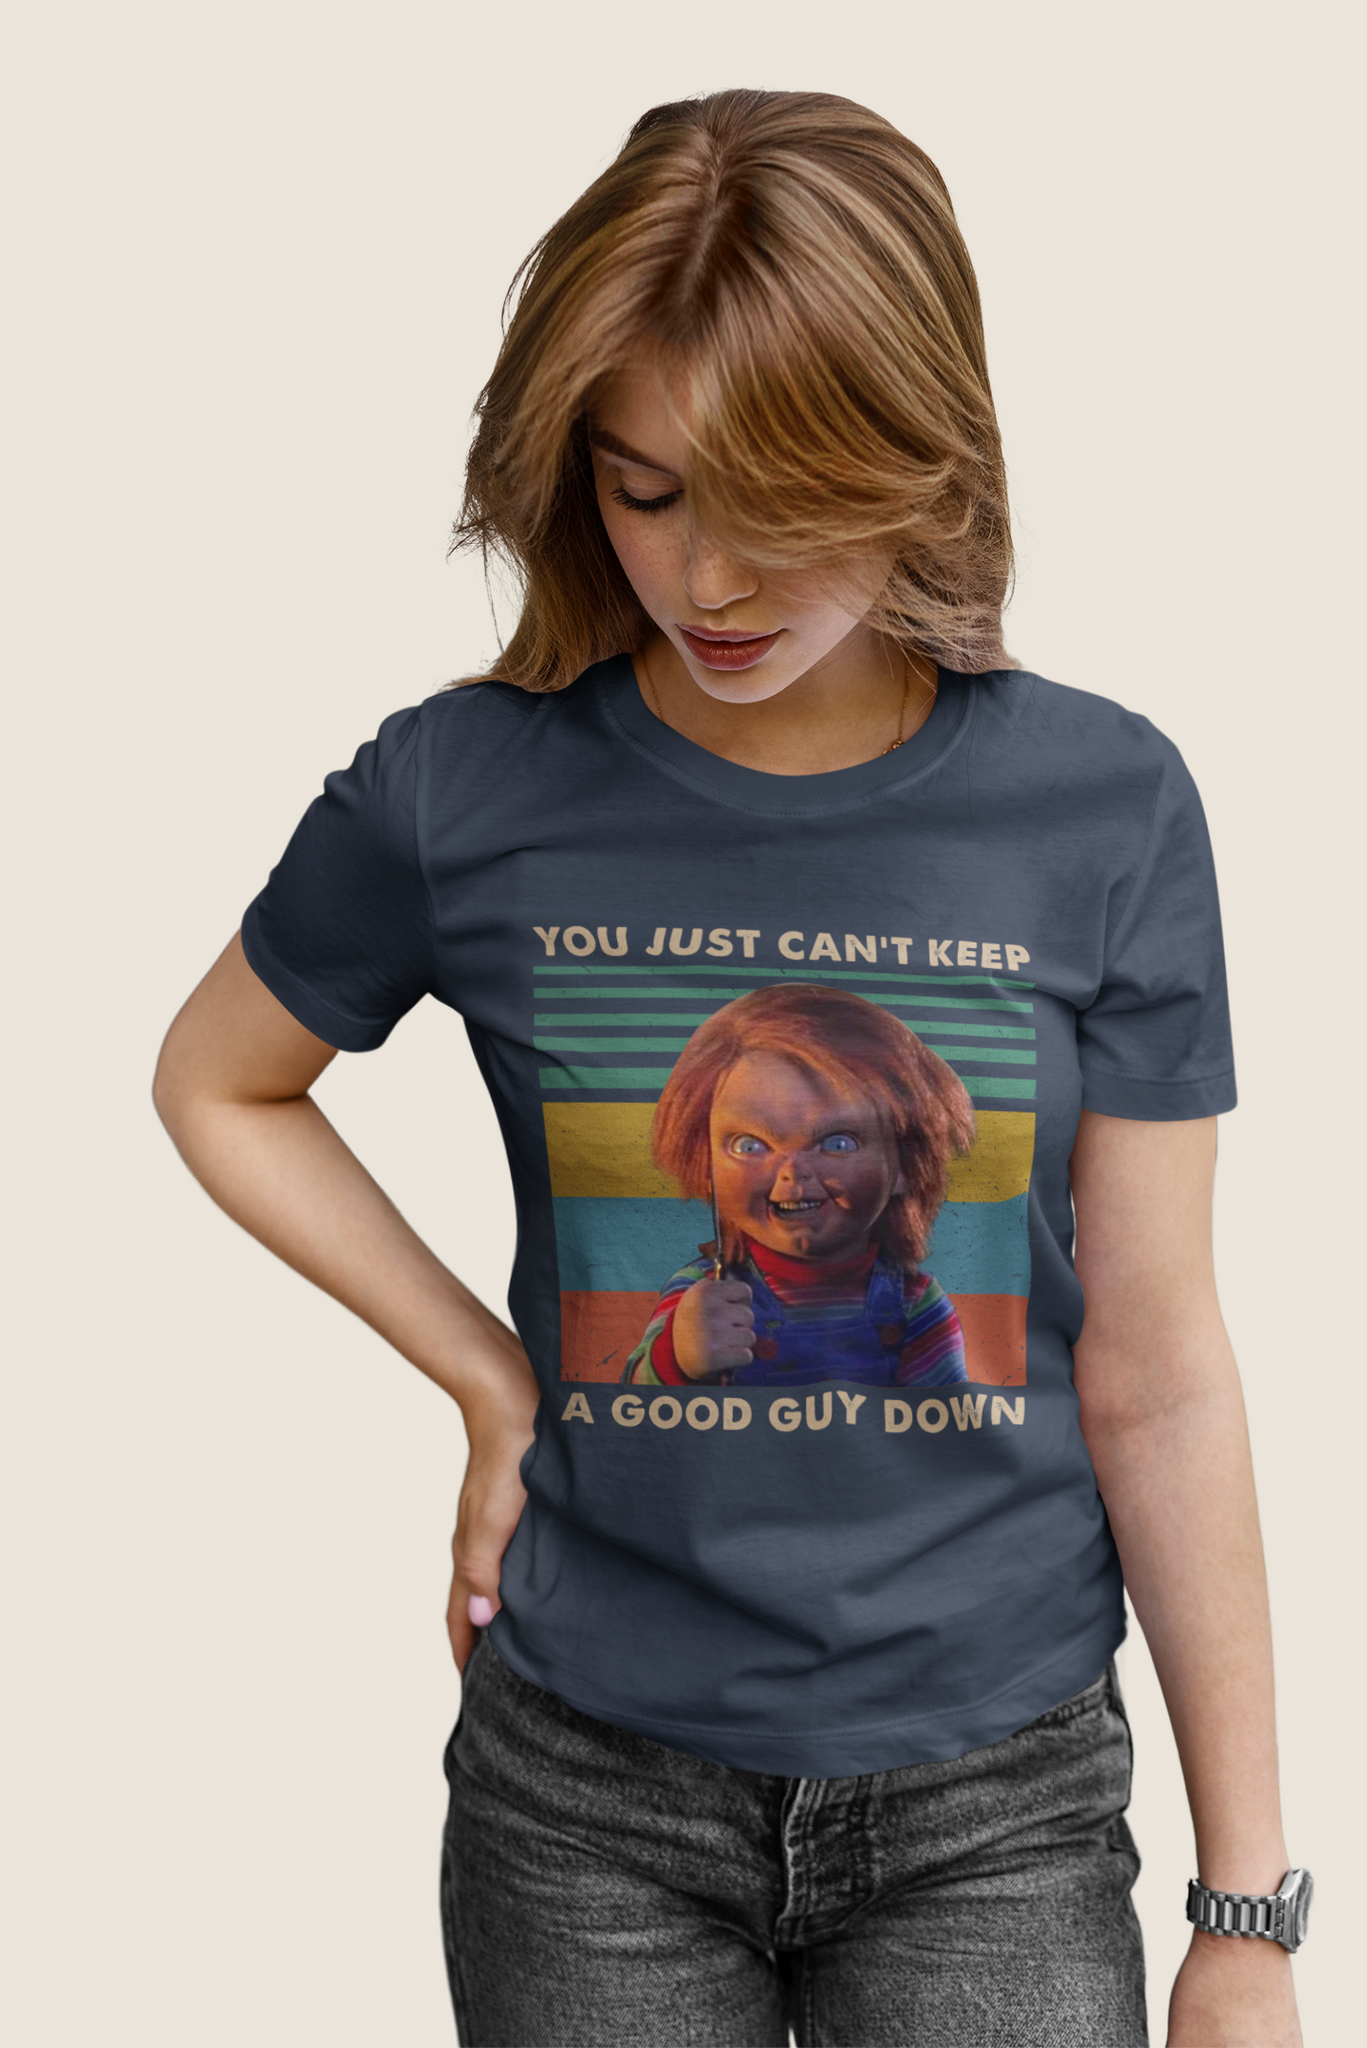 Chucky Vintage T Shirt, Horror Character Shirt, You Just Cant Keep A Good Guy Down Tshirt, Halloween Gifts